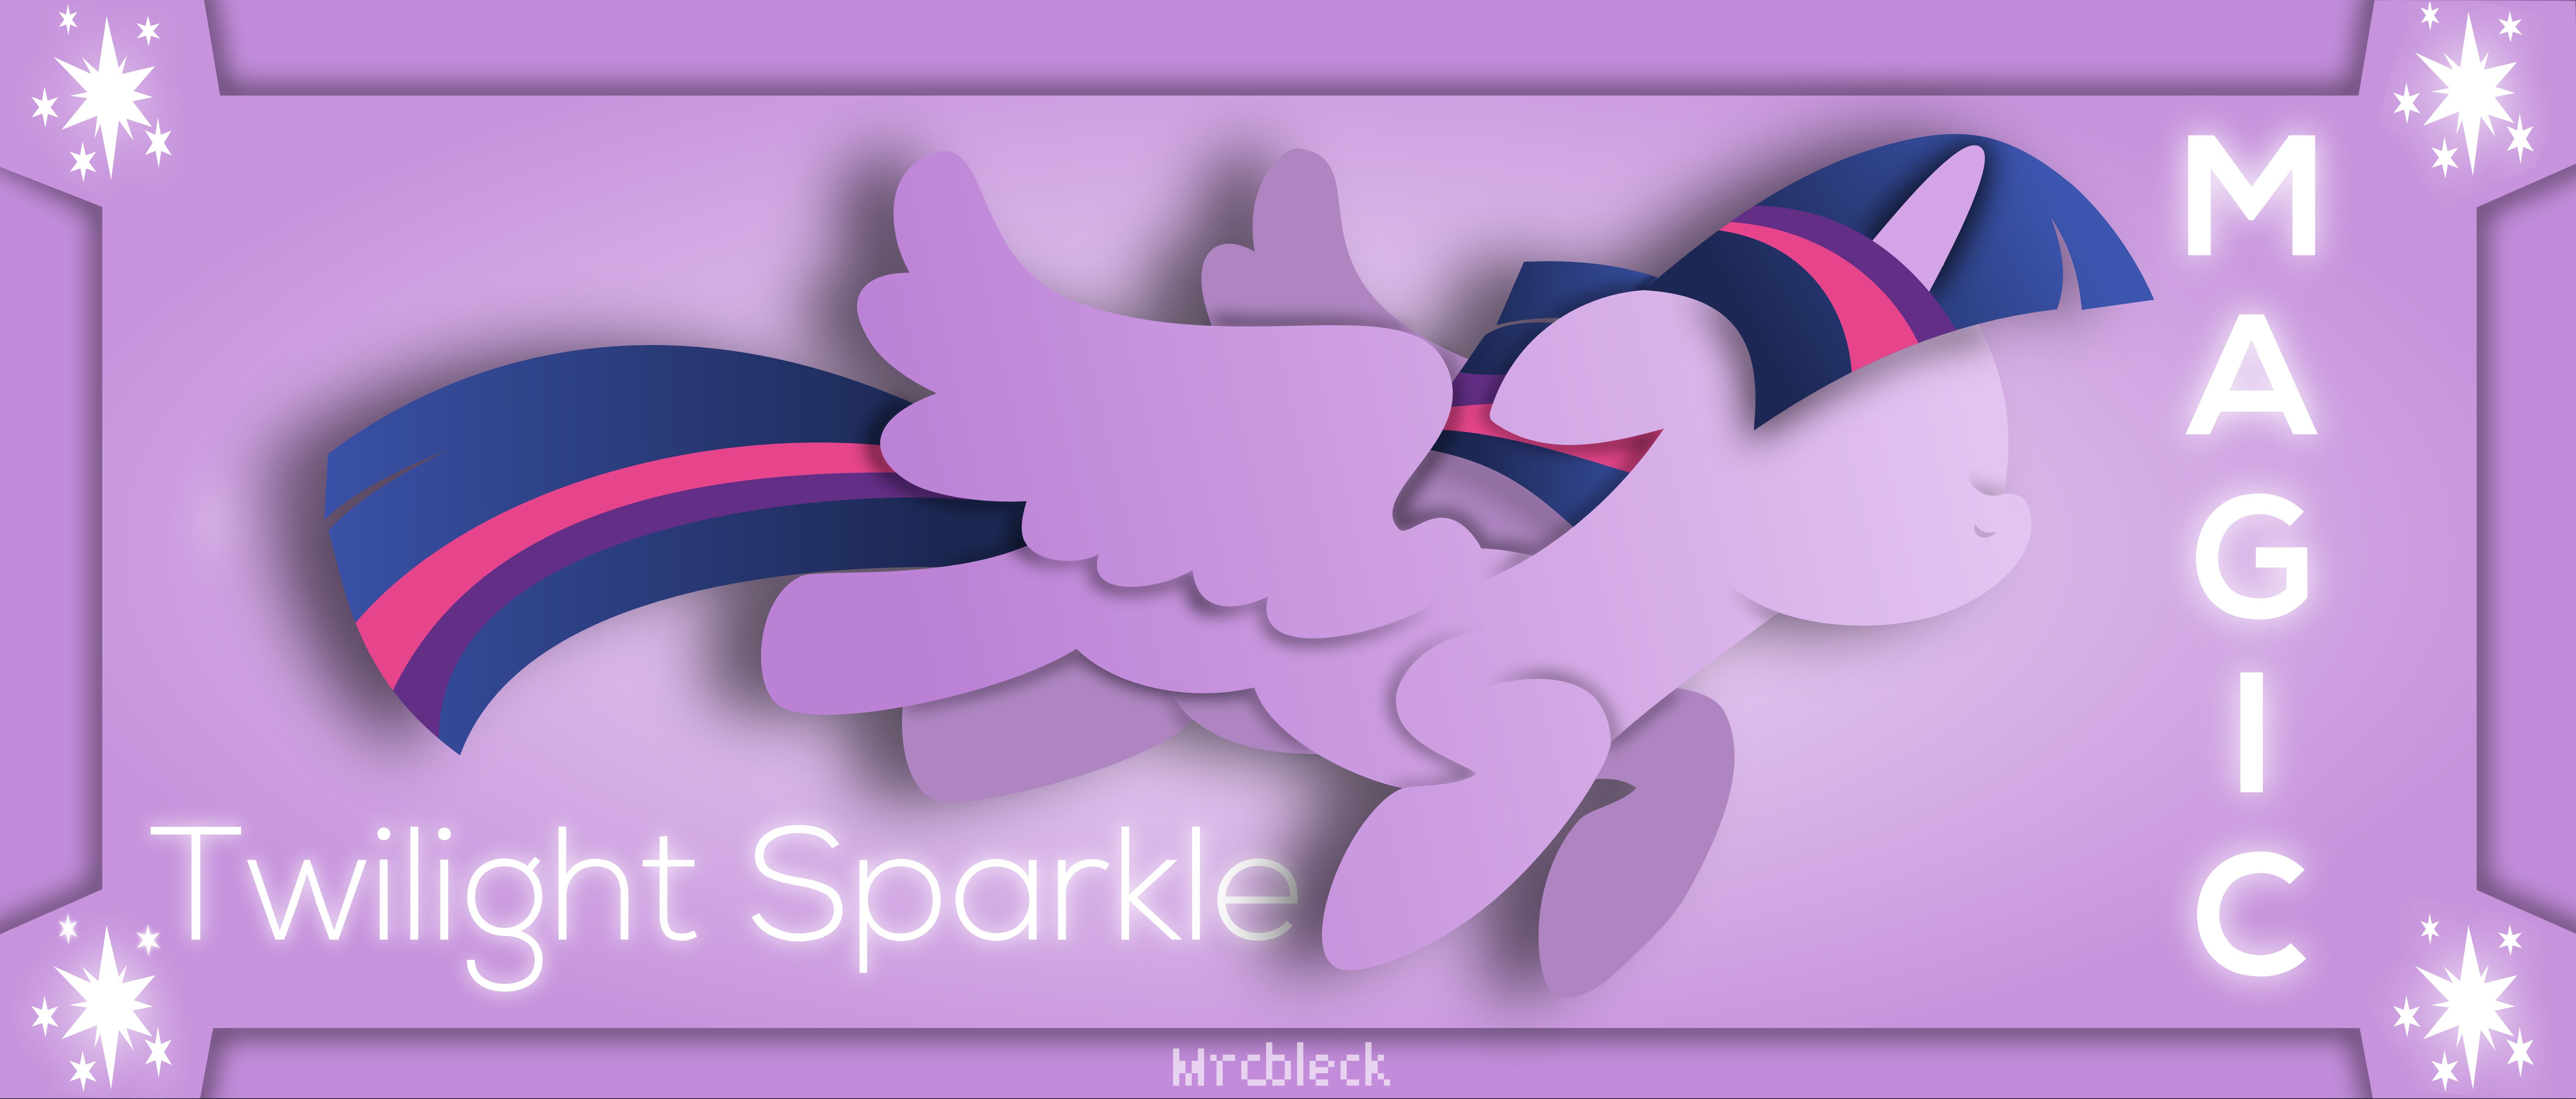 Twilight Sparkle  1366x768 Wallpapers